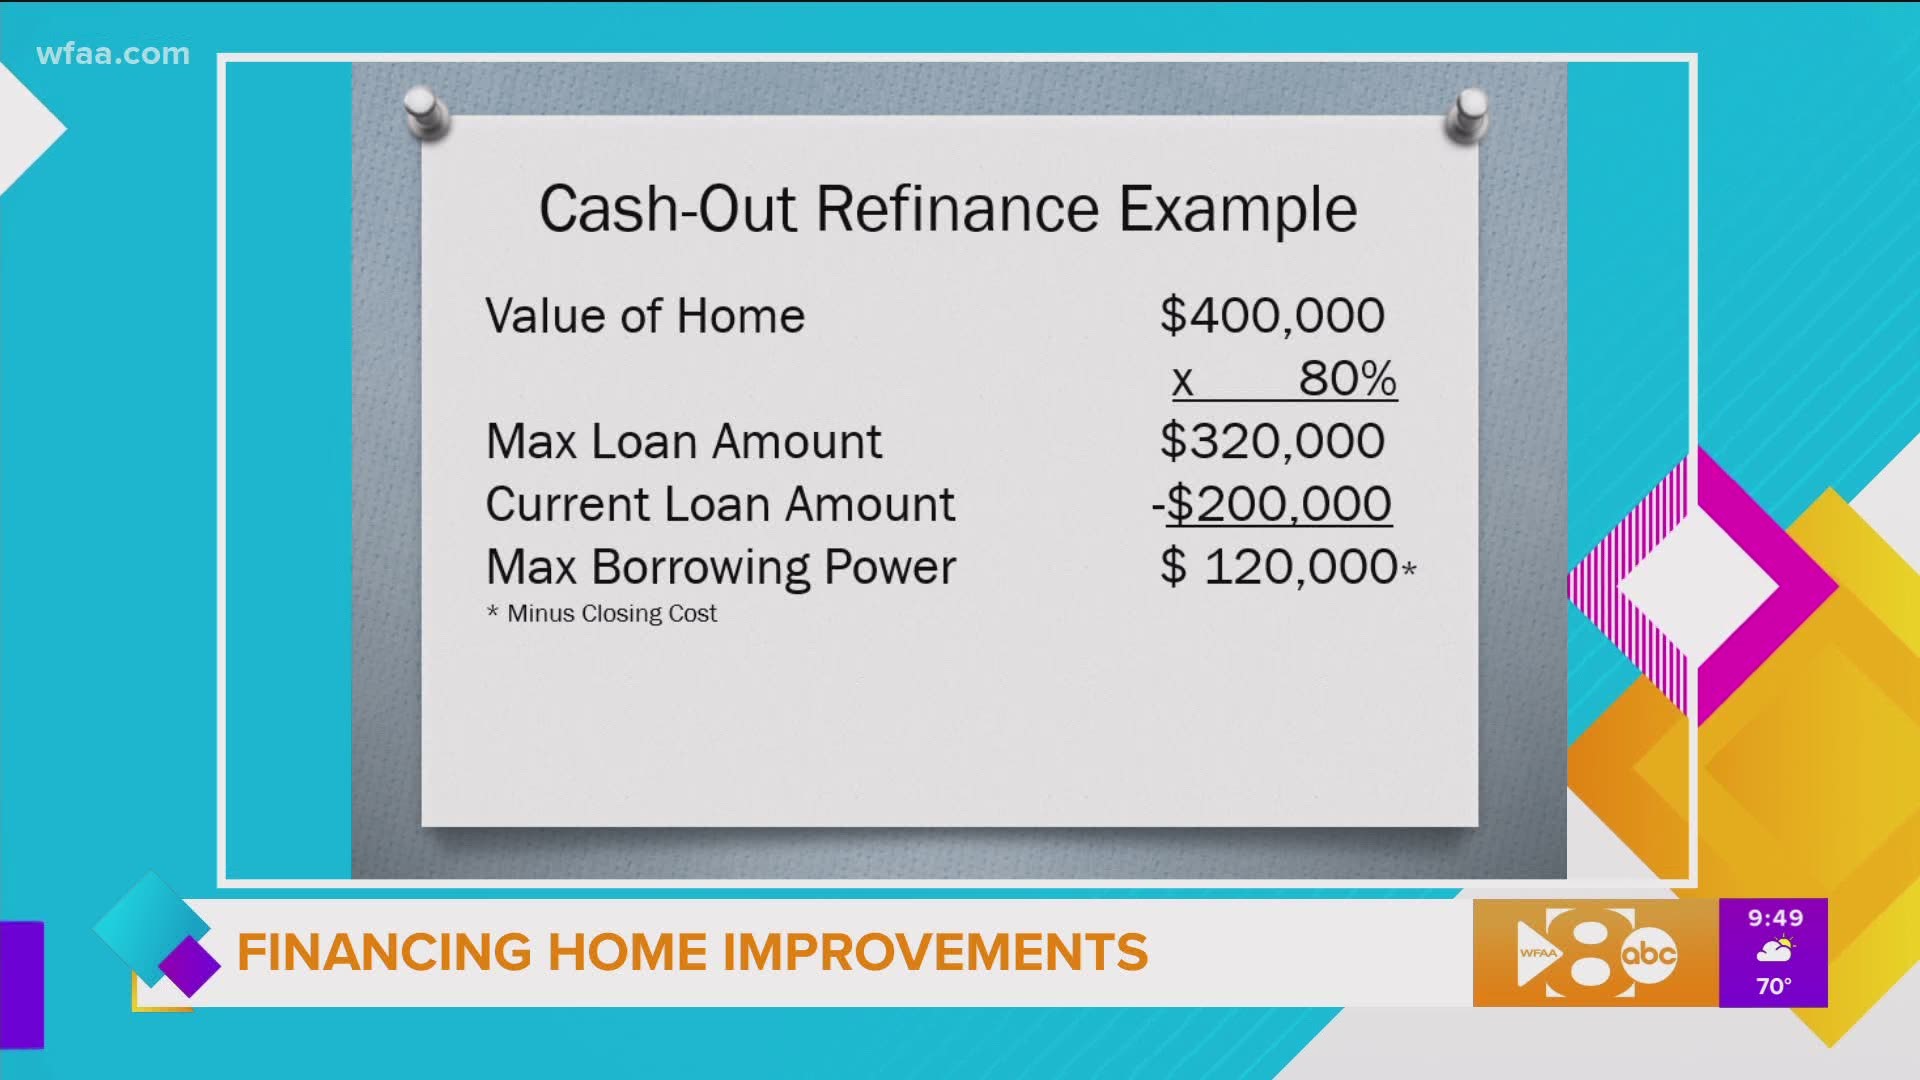 Fastest How To Cash Out Refinance Home